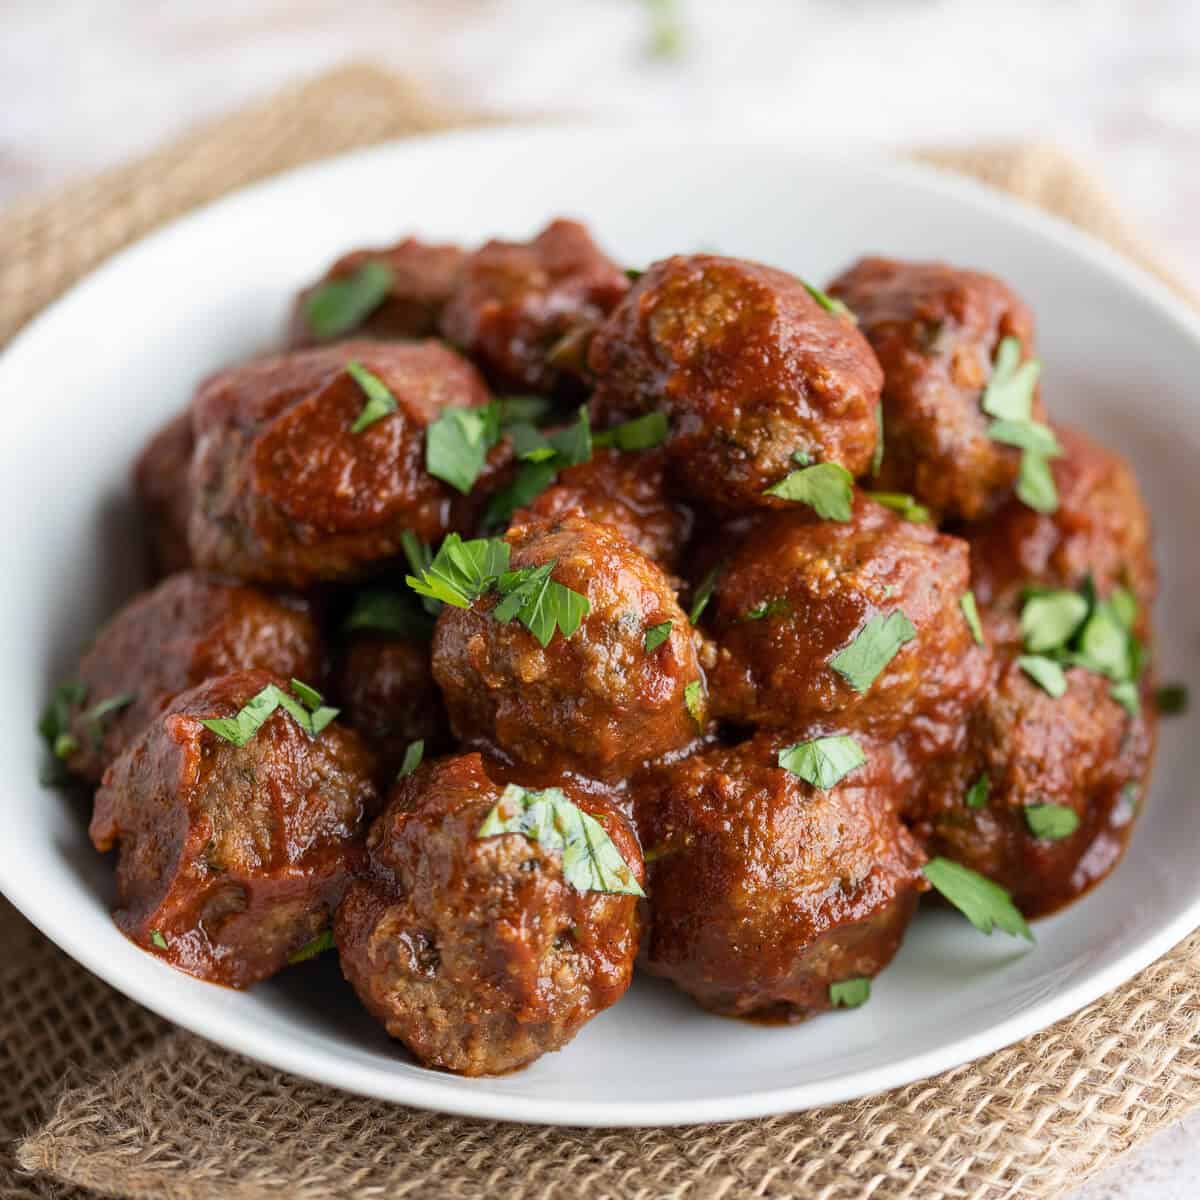 Small bbq meatballs in a white bowl garnished with parsley.